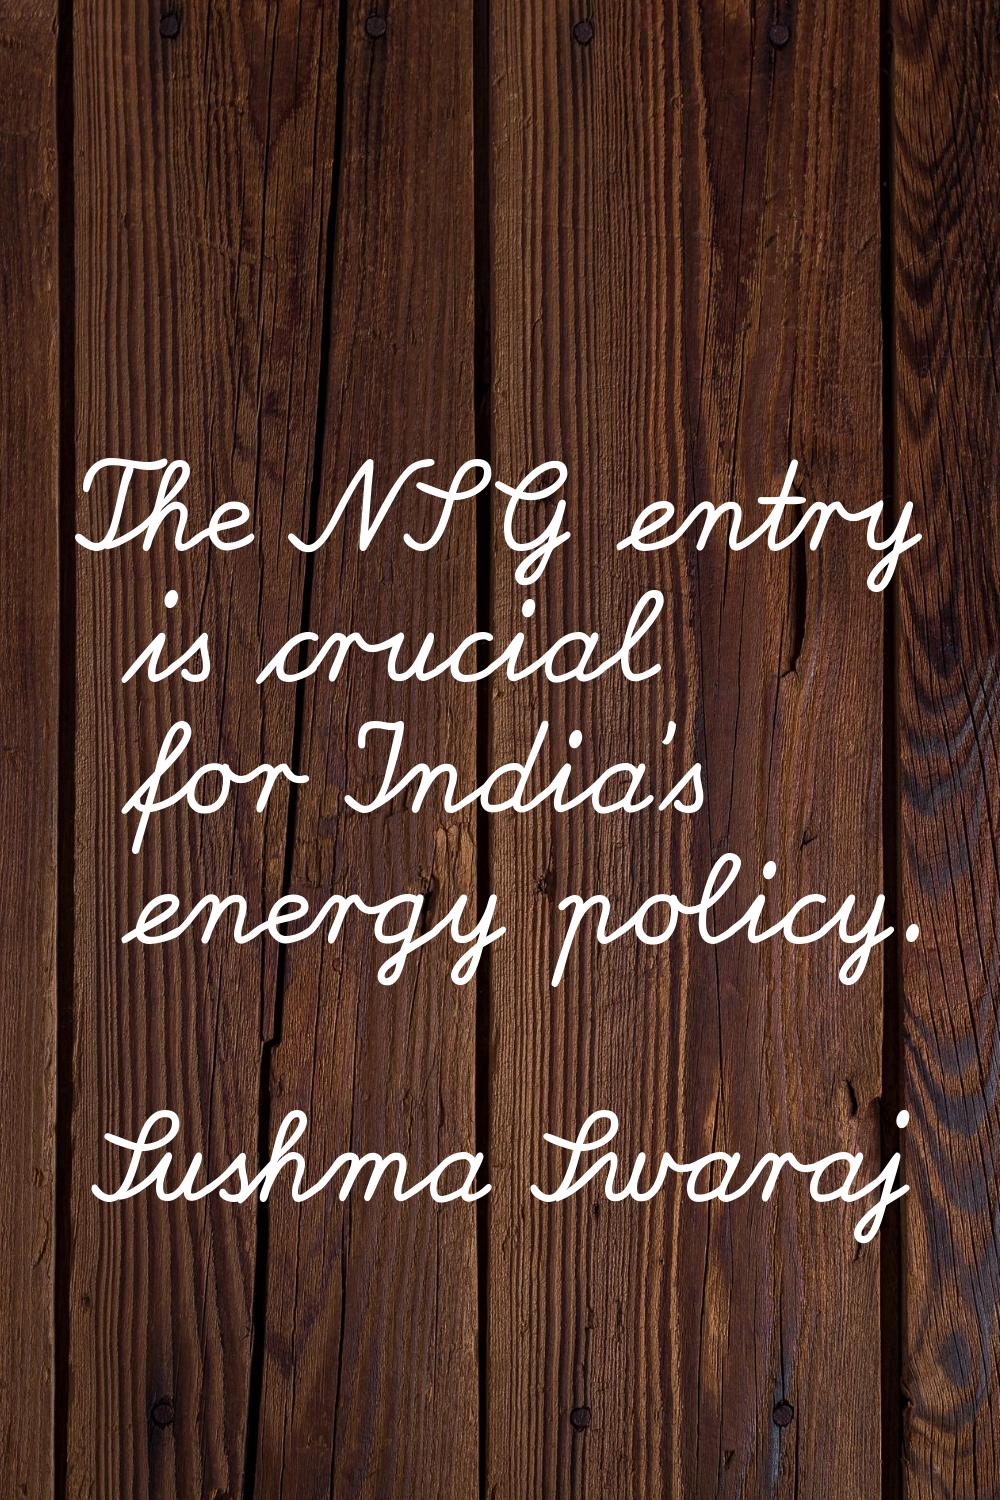 The NSG entry is crucial for India's energy policy.